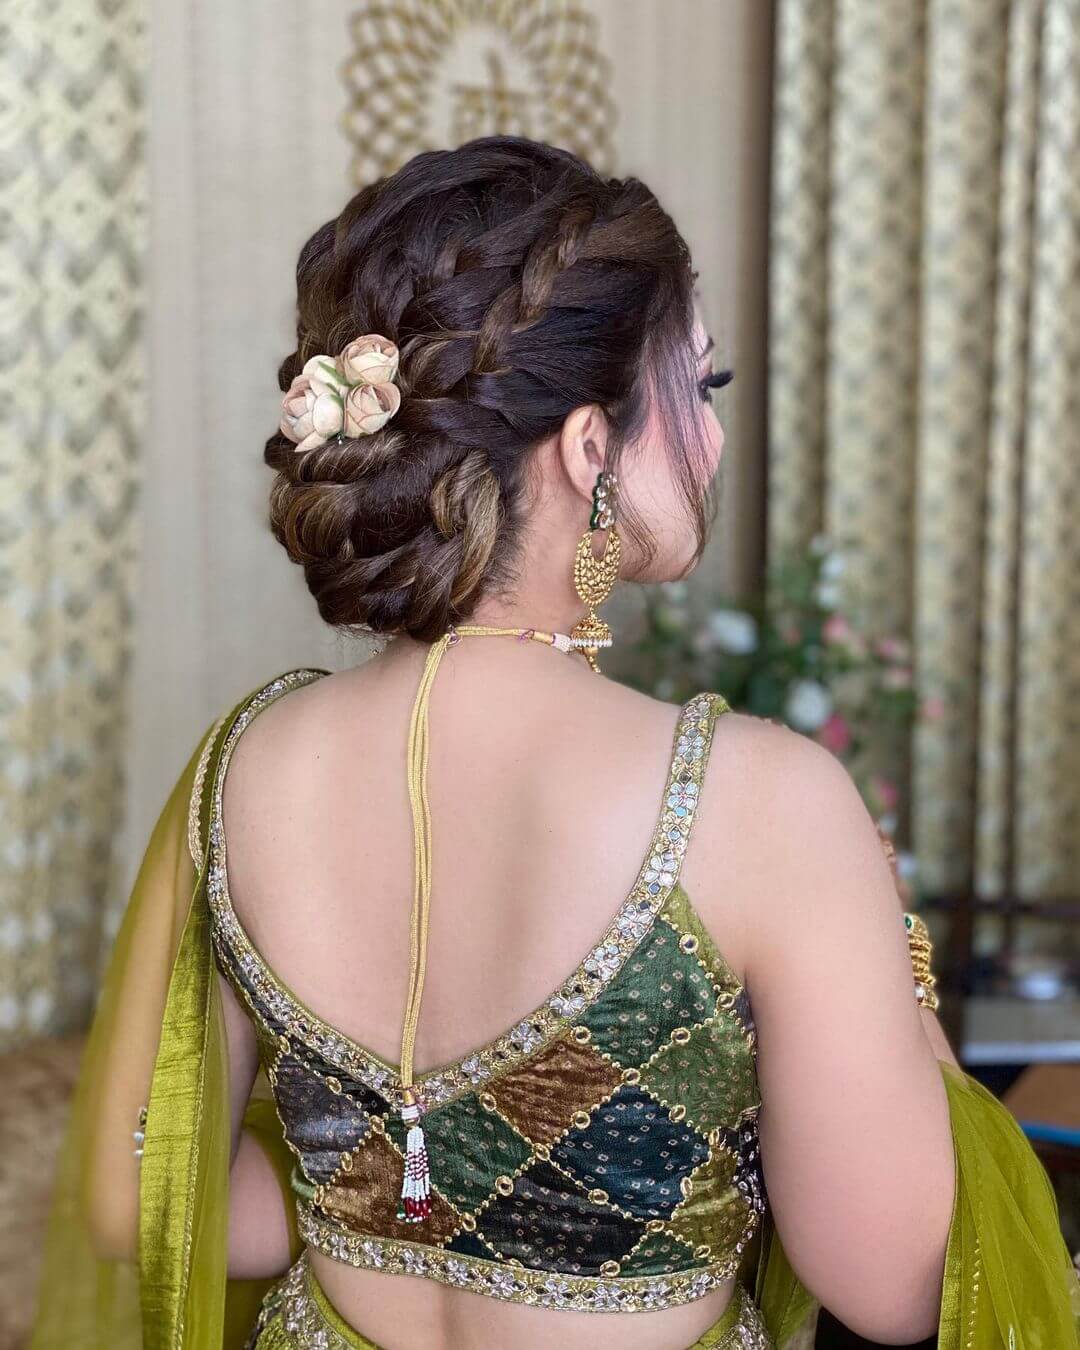 Updos Buns and More  Easy Hairstyles to Go With Your Sarees Infographic   sareecom by Asopalav